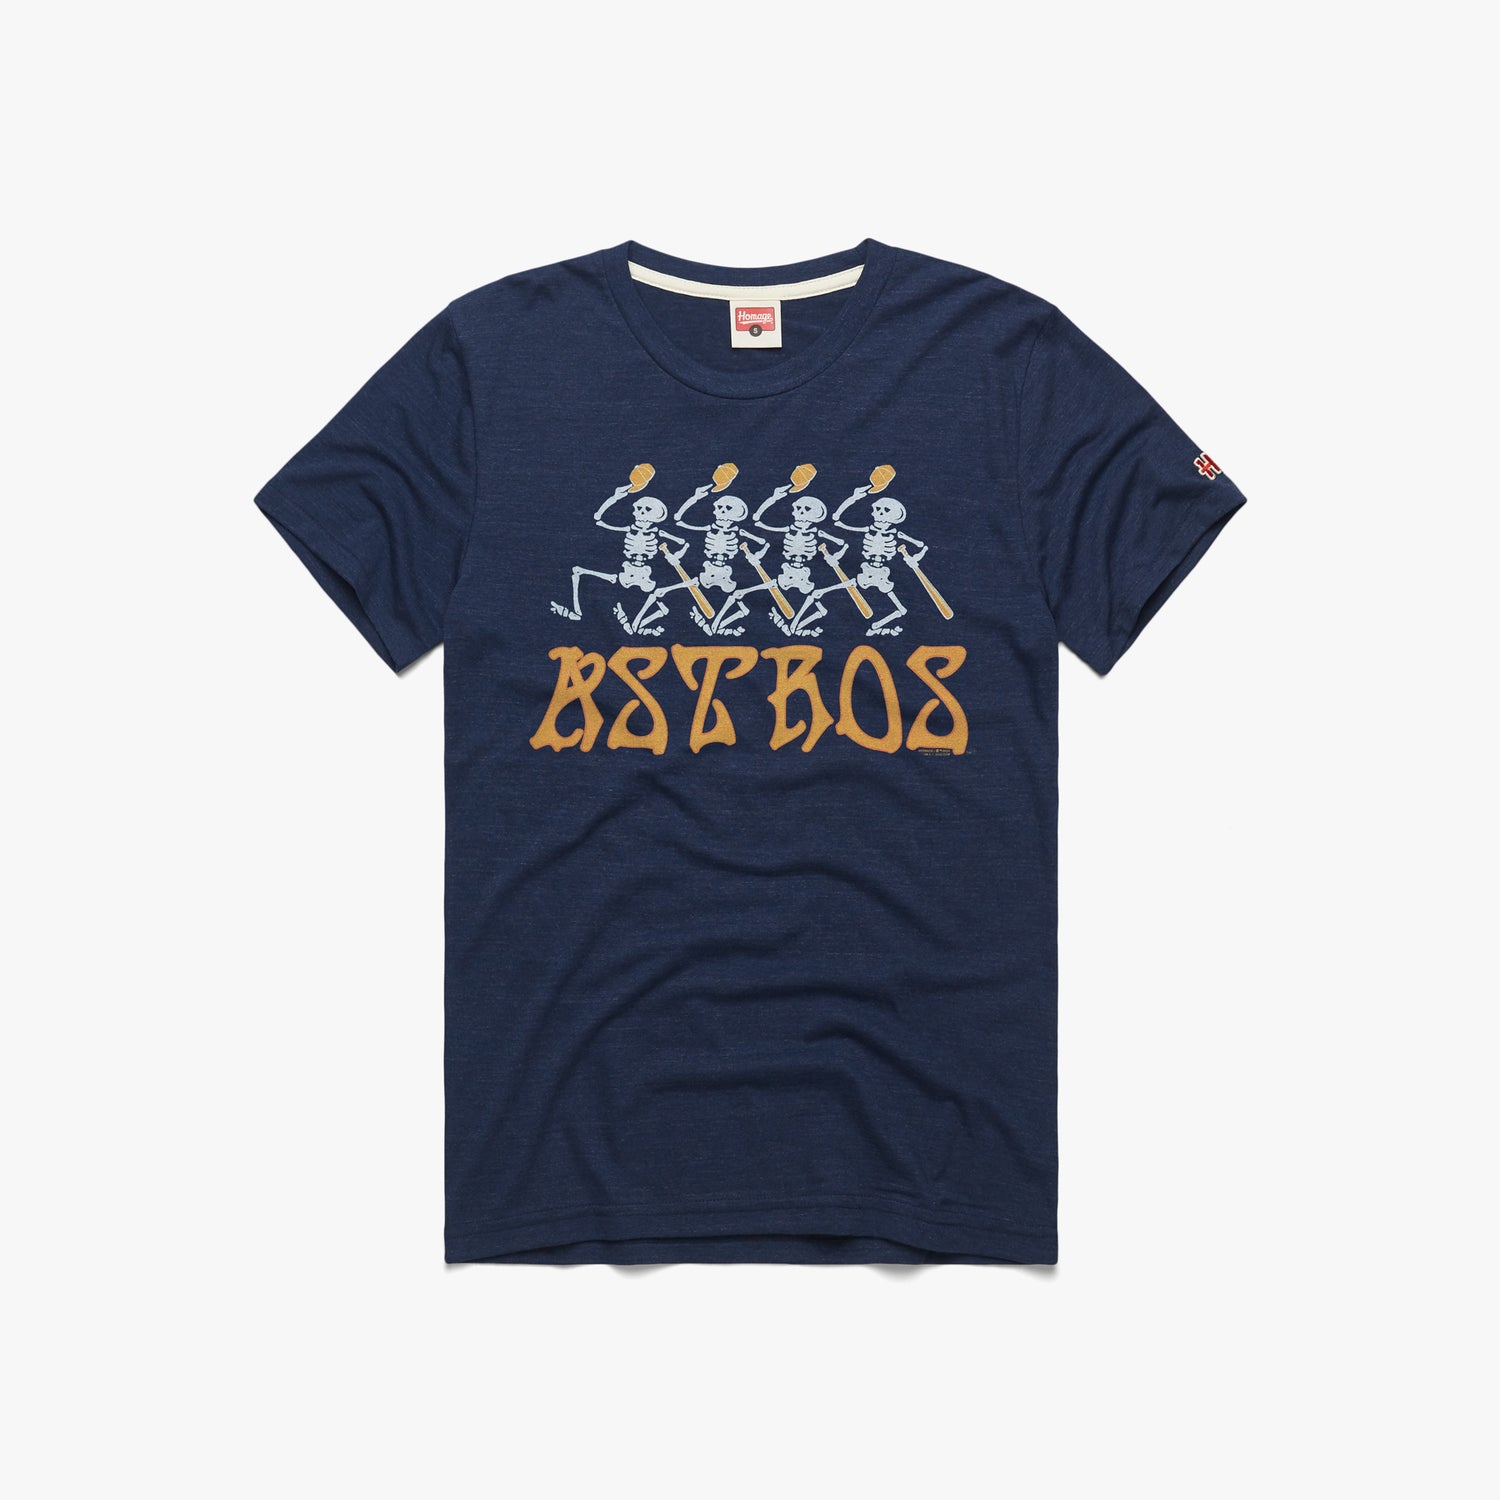 MLB x Grateful Dead x Astros T-Shirt from Homage. | Navy | Vintage Apparel from Homage.